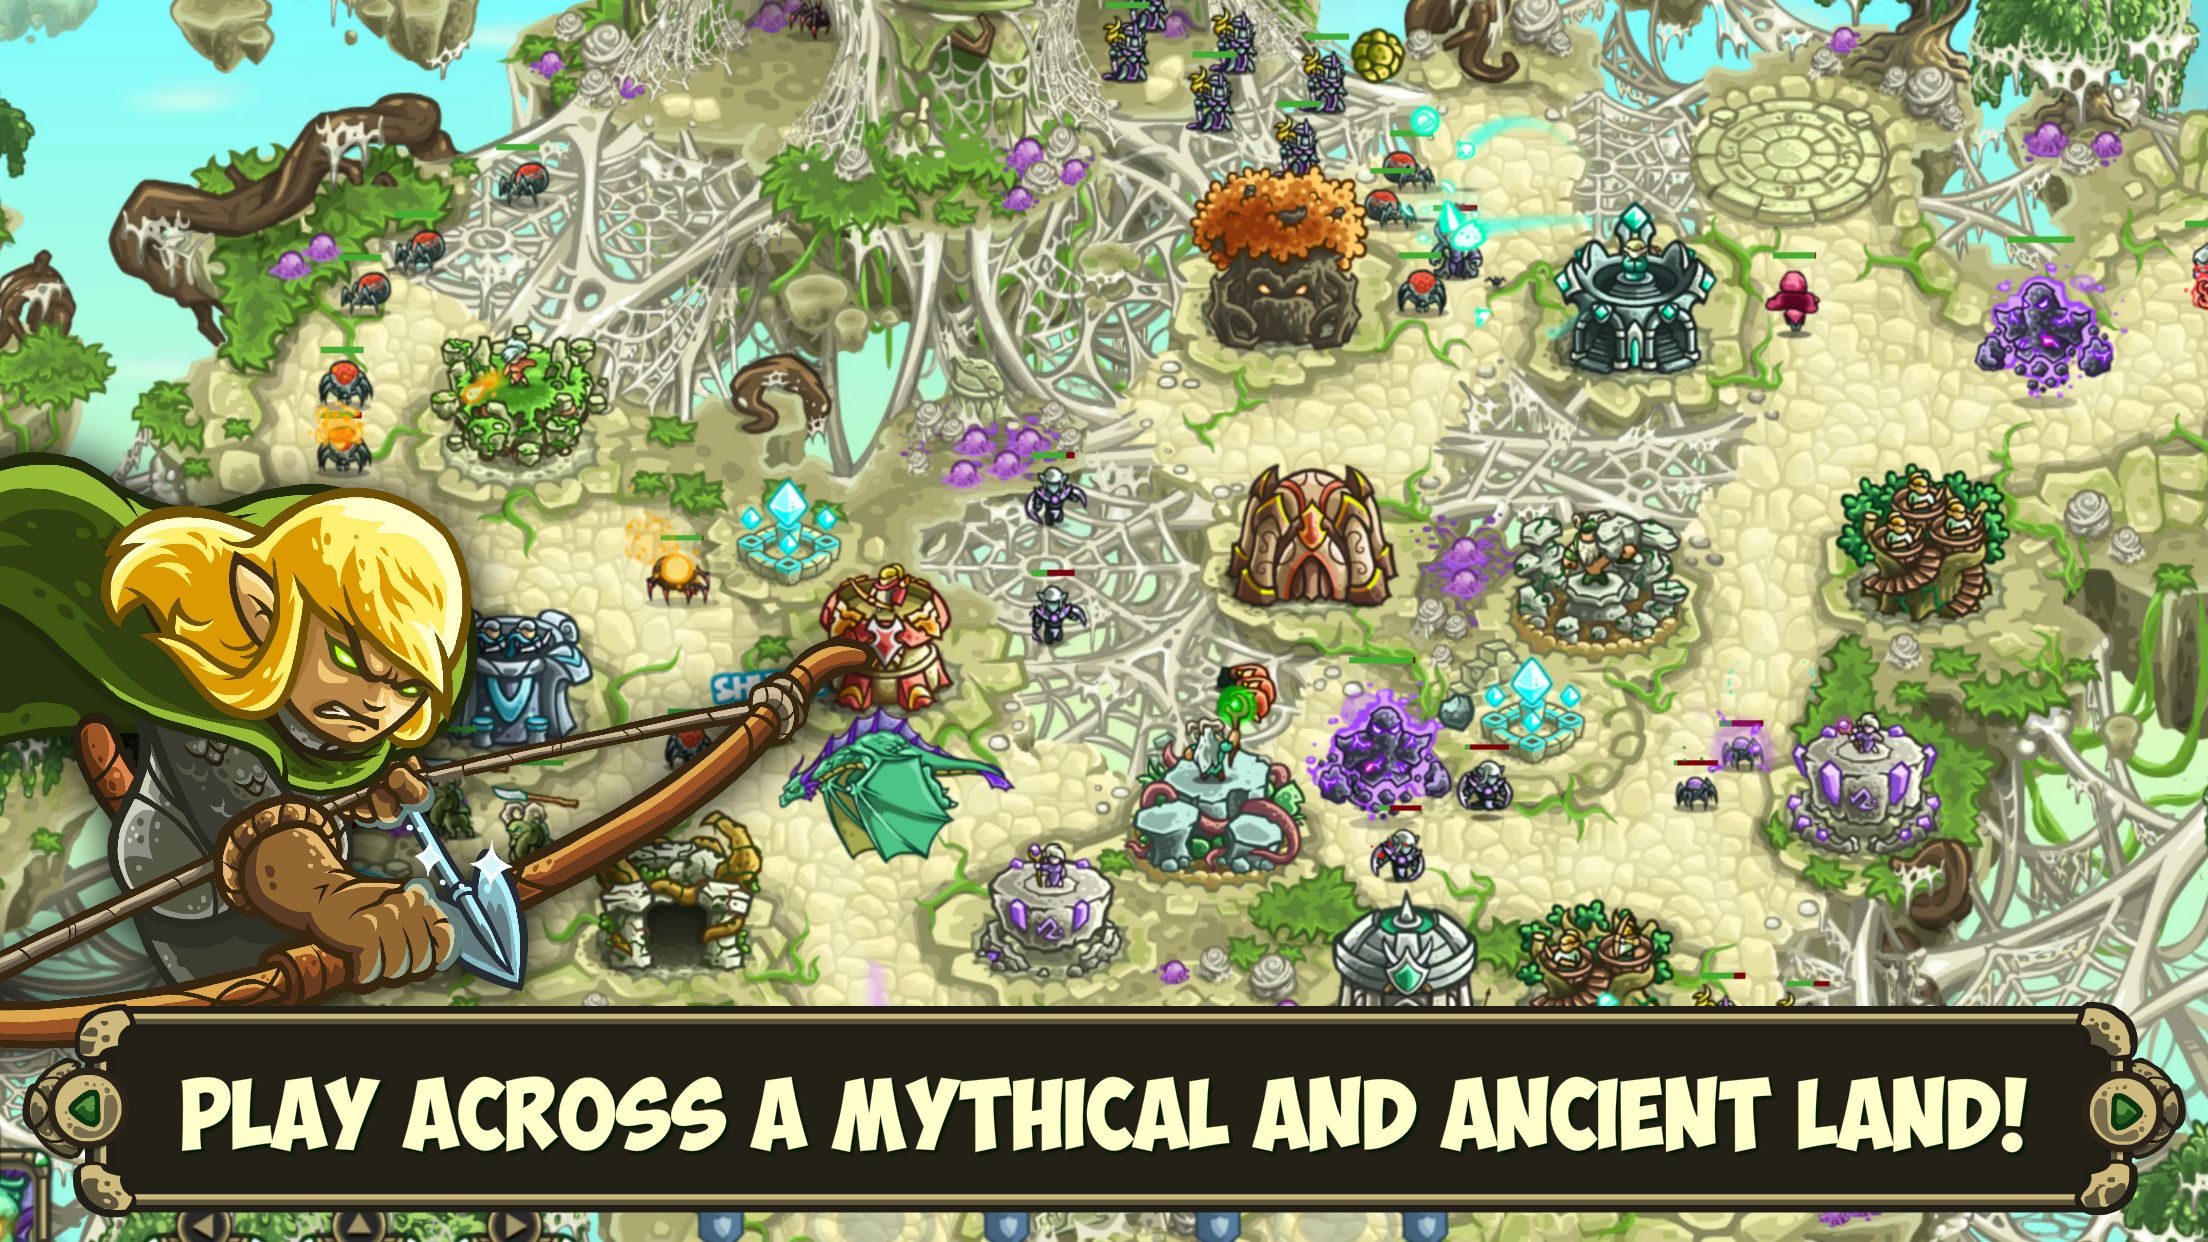 best-tower-defense-games-kingdom-rush-origins-td-game-play-across-a-mythical-and-ancient-land